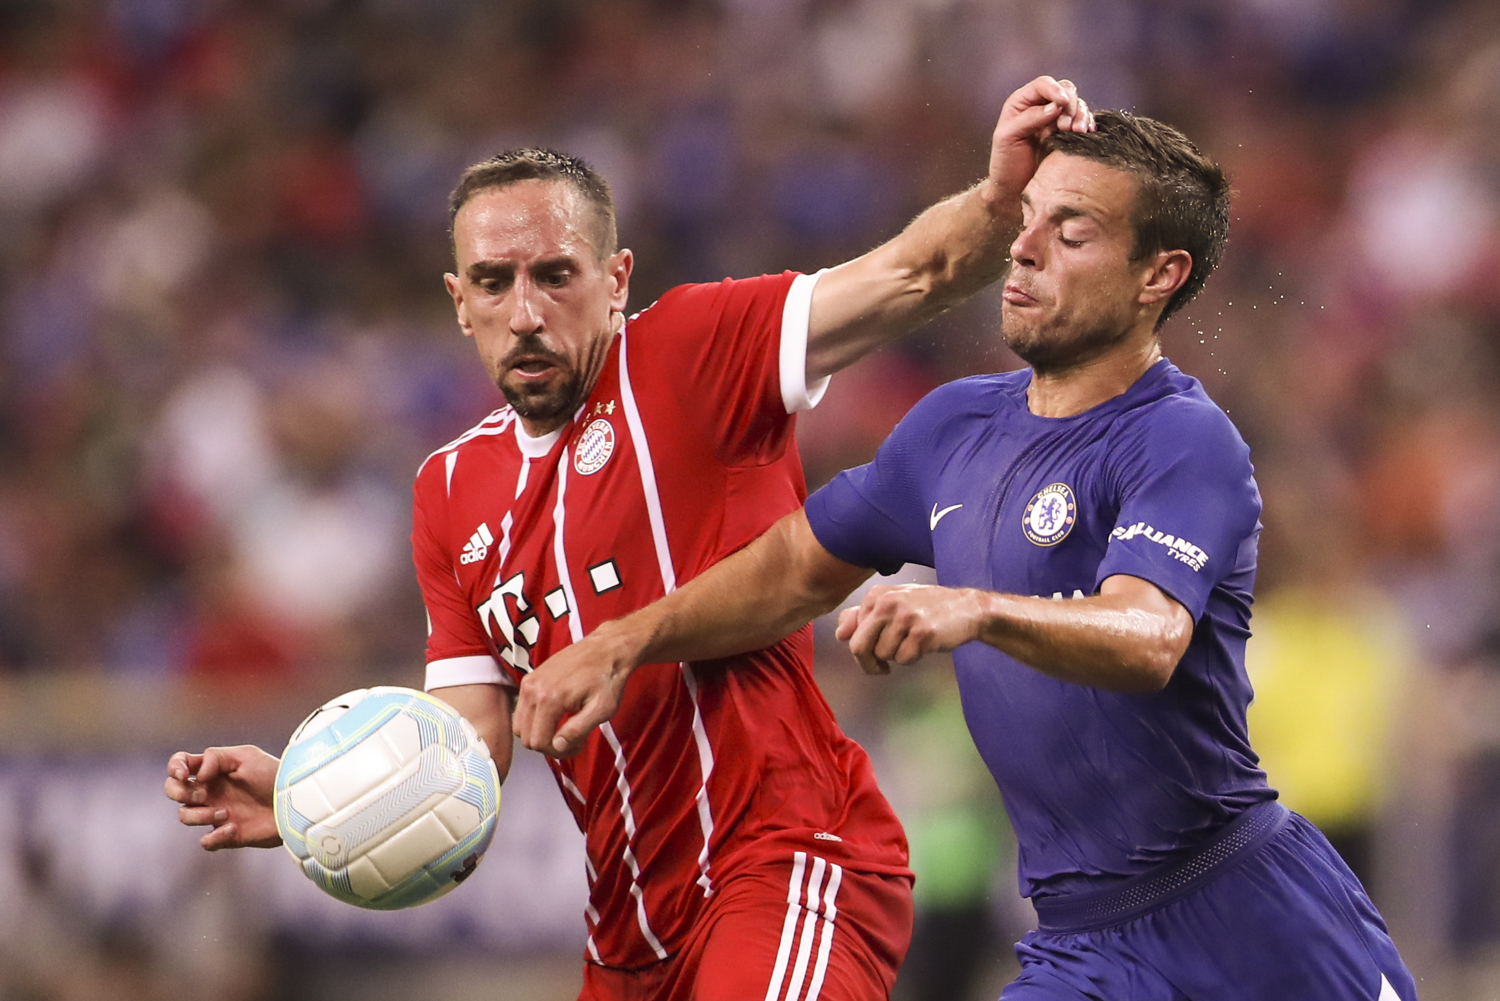  Soccer Football - Chelsea vs Bayern Munich - International Champions Cup - Singapore - July 25, 2017 Bayern Munich's Franck Ribery in action against Chelsea's Cesar Azpilicueta REUTERS/Yong Teck Lim 